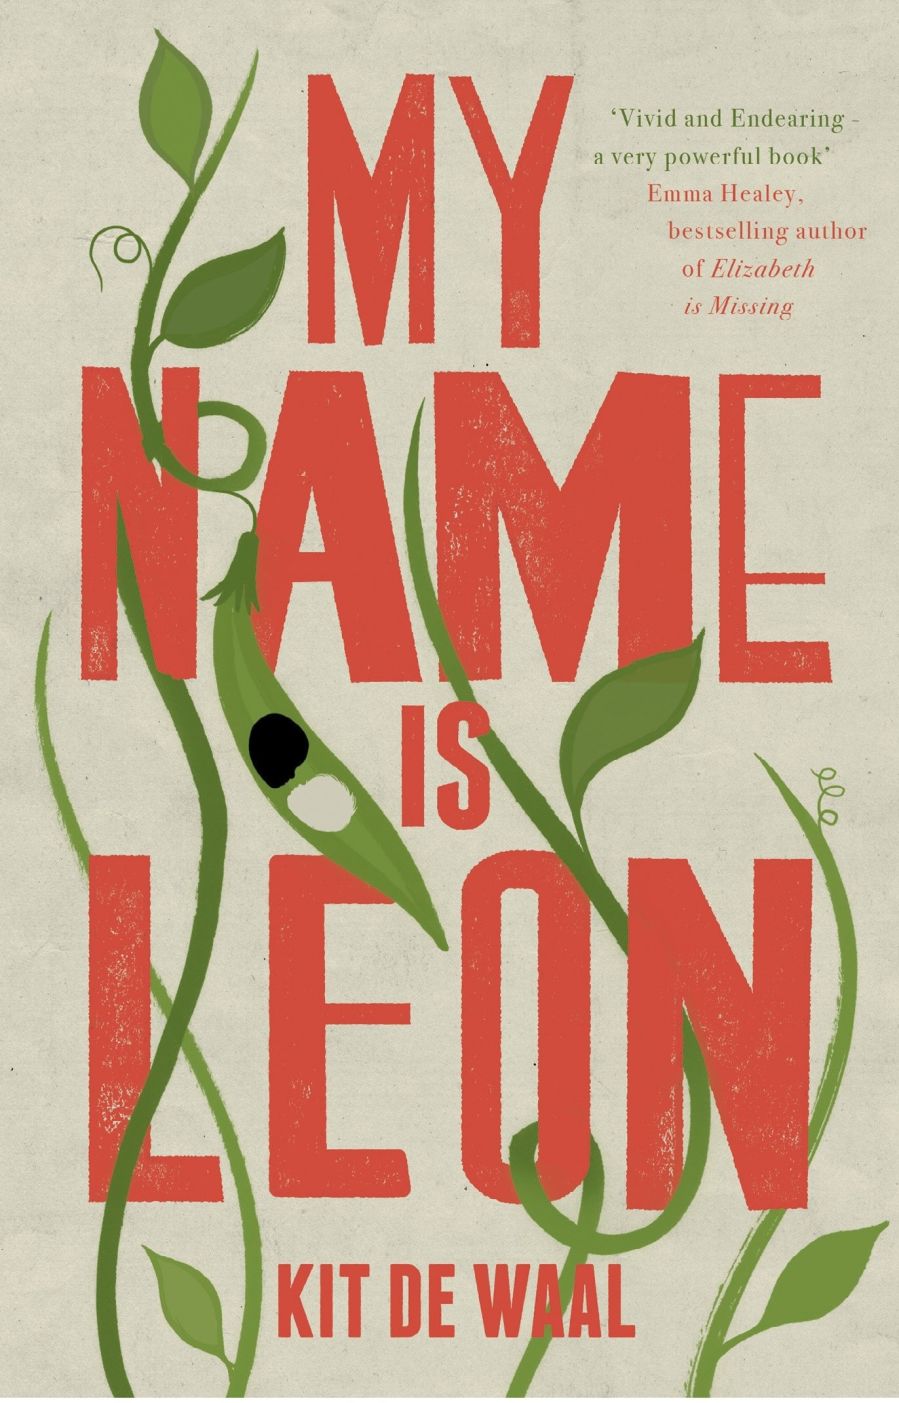 Book cover of My Name Is Leon by Kit de Waal.